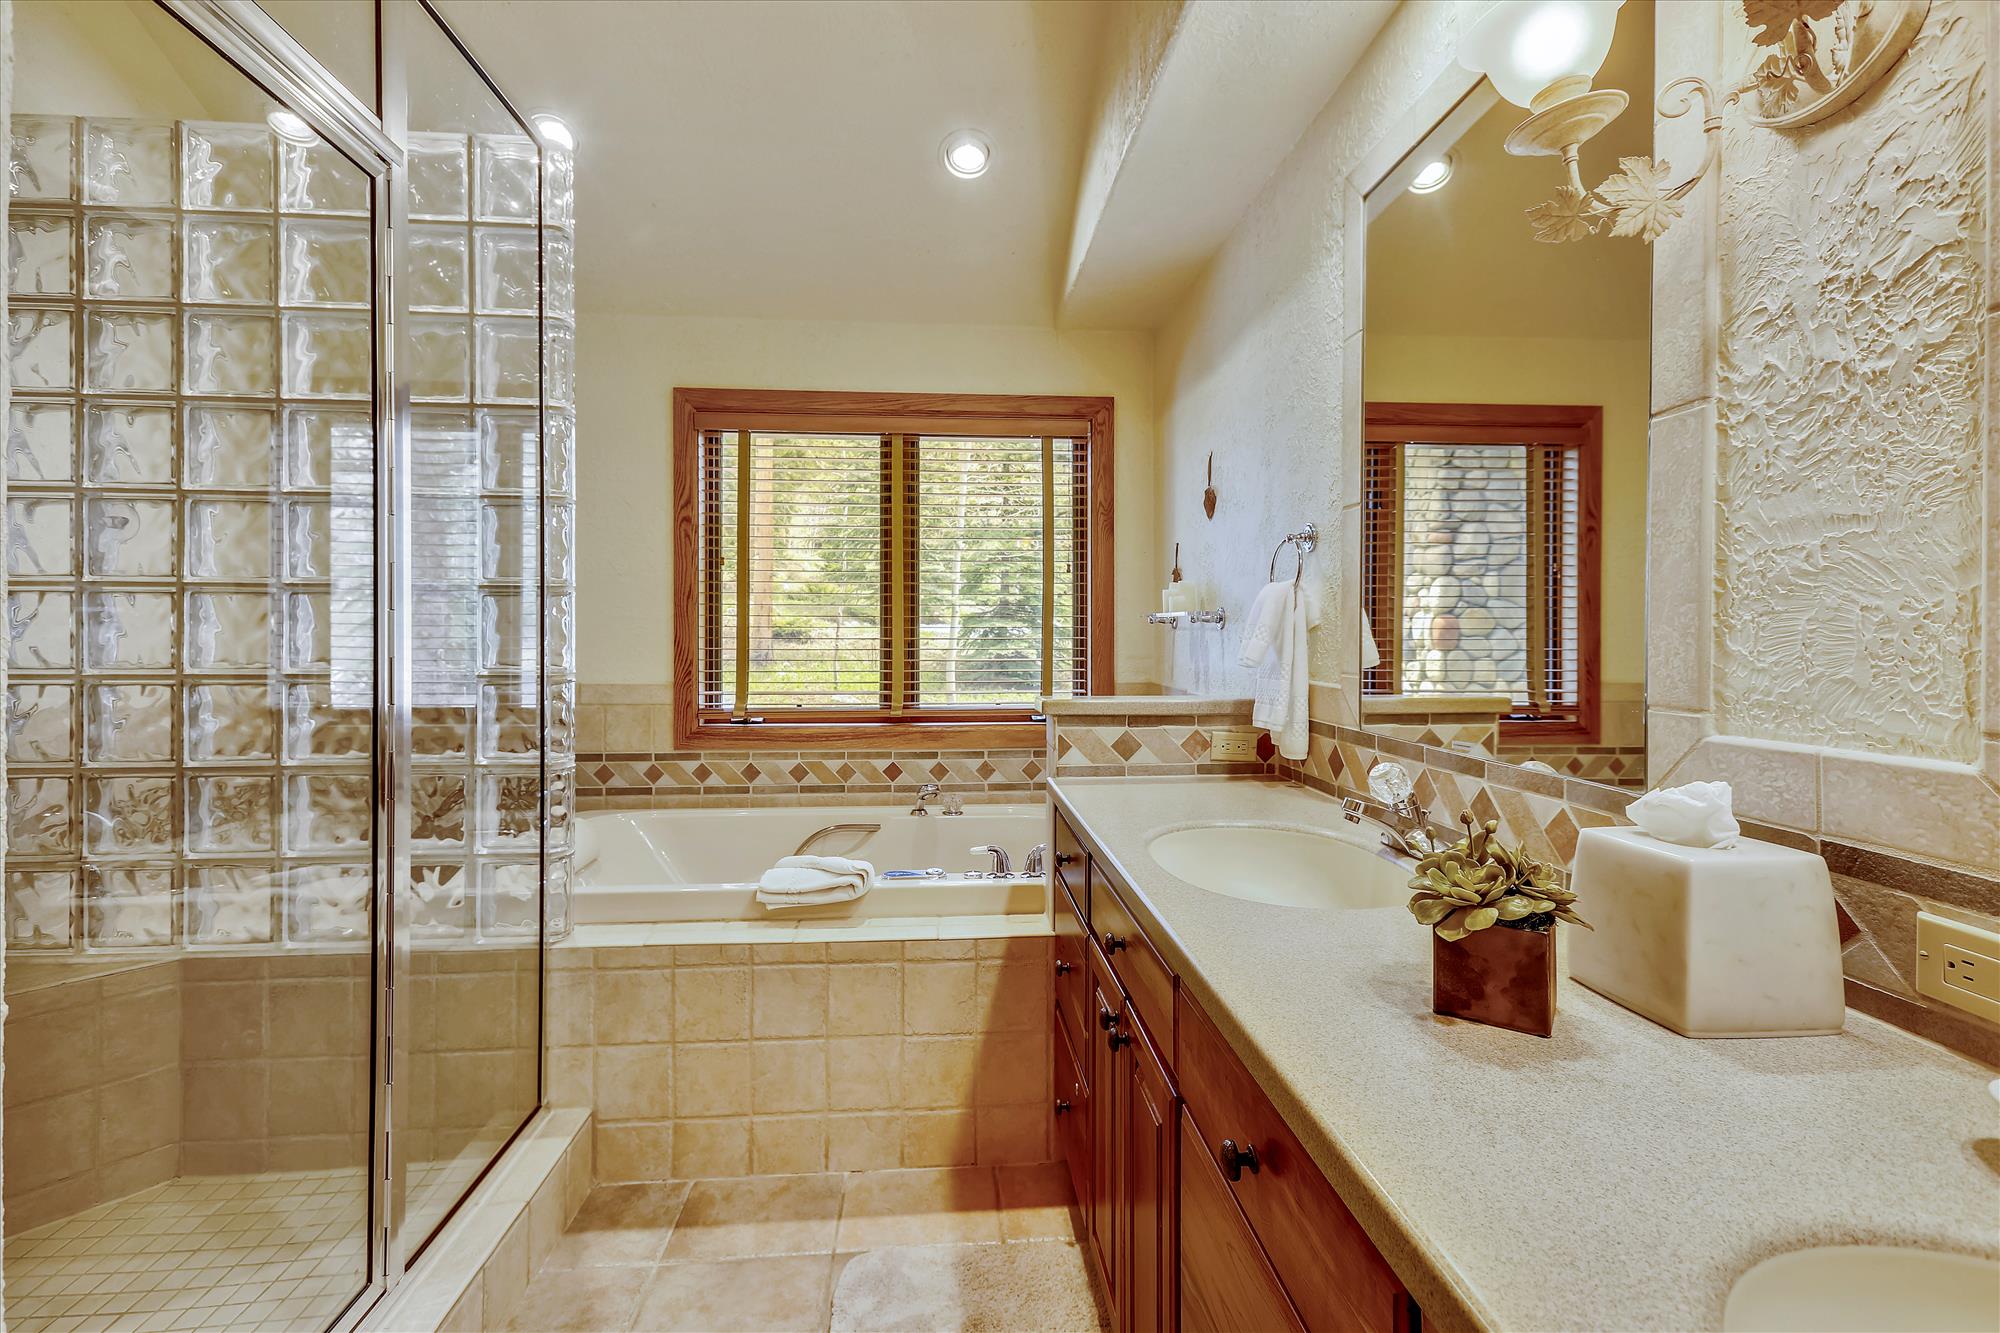 Ensuit master bathroom with large jetted soaking tub and walk-in shower - Evergreen Lodge Breckenridge Vacation Rental